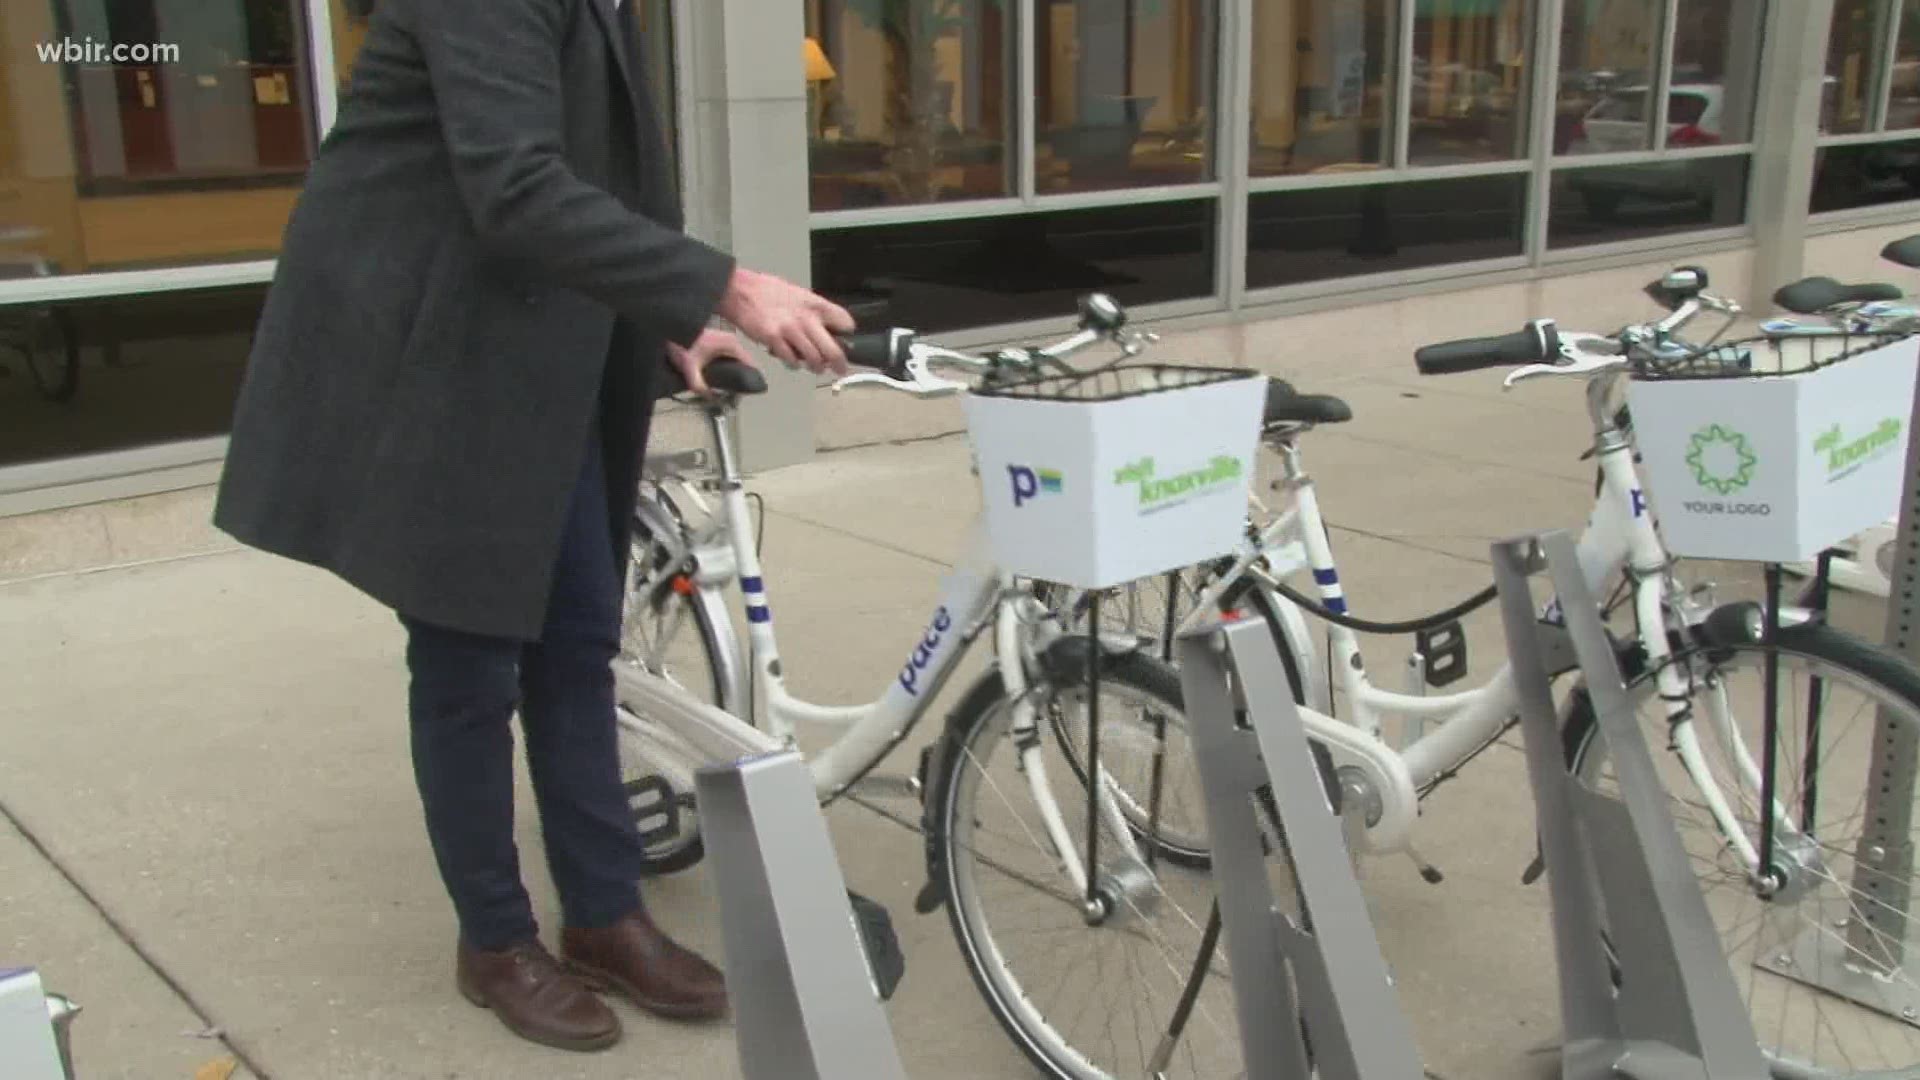 The City of Knoxville says its bike-sharing program will be paused while it looks for a new vendor.